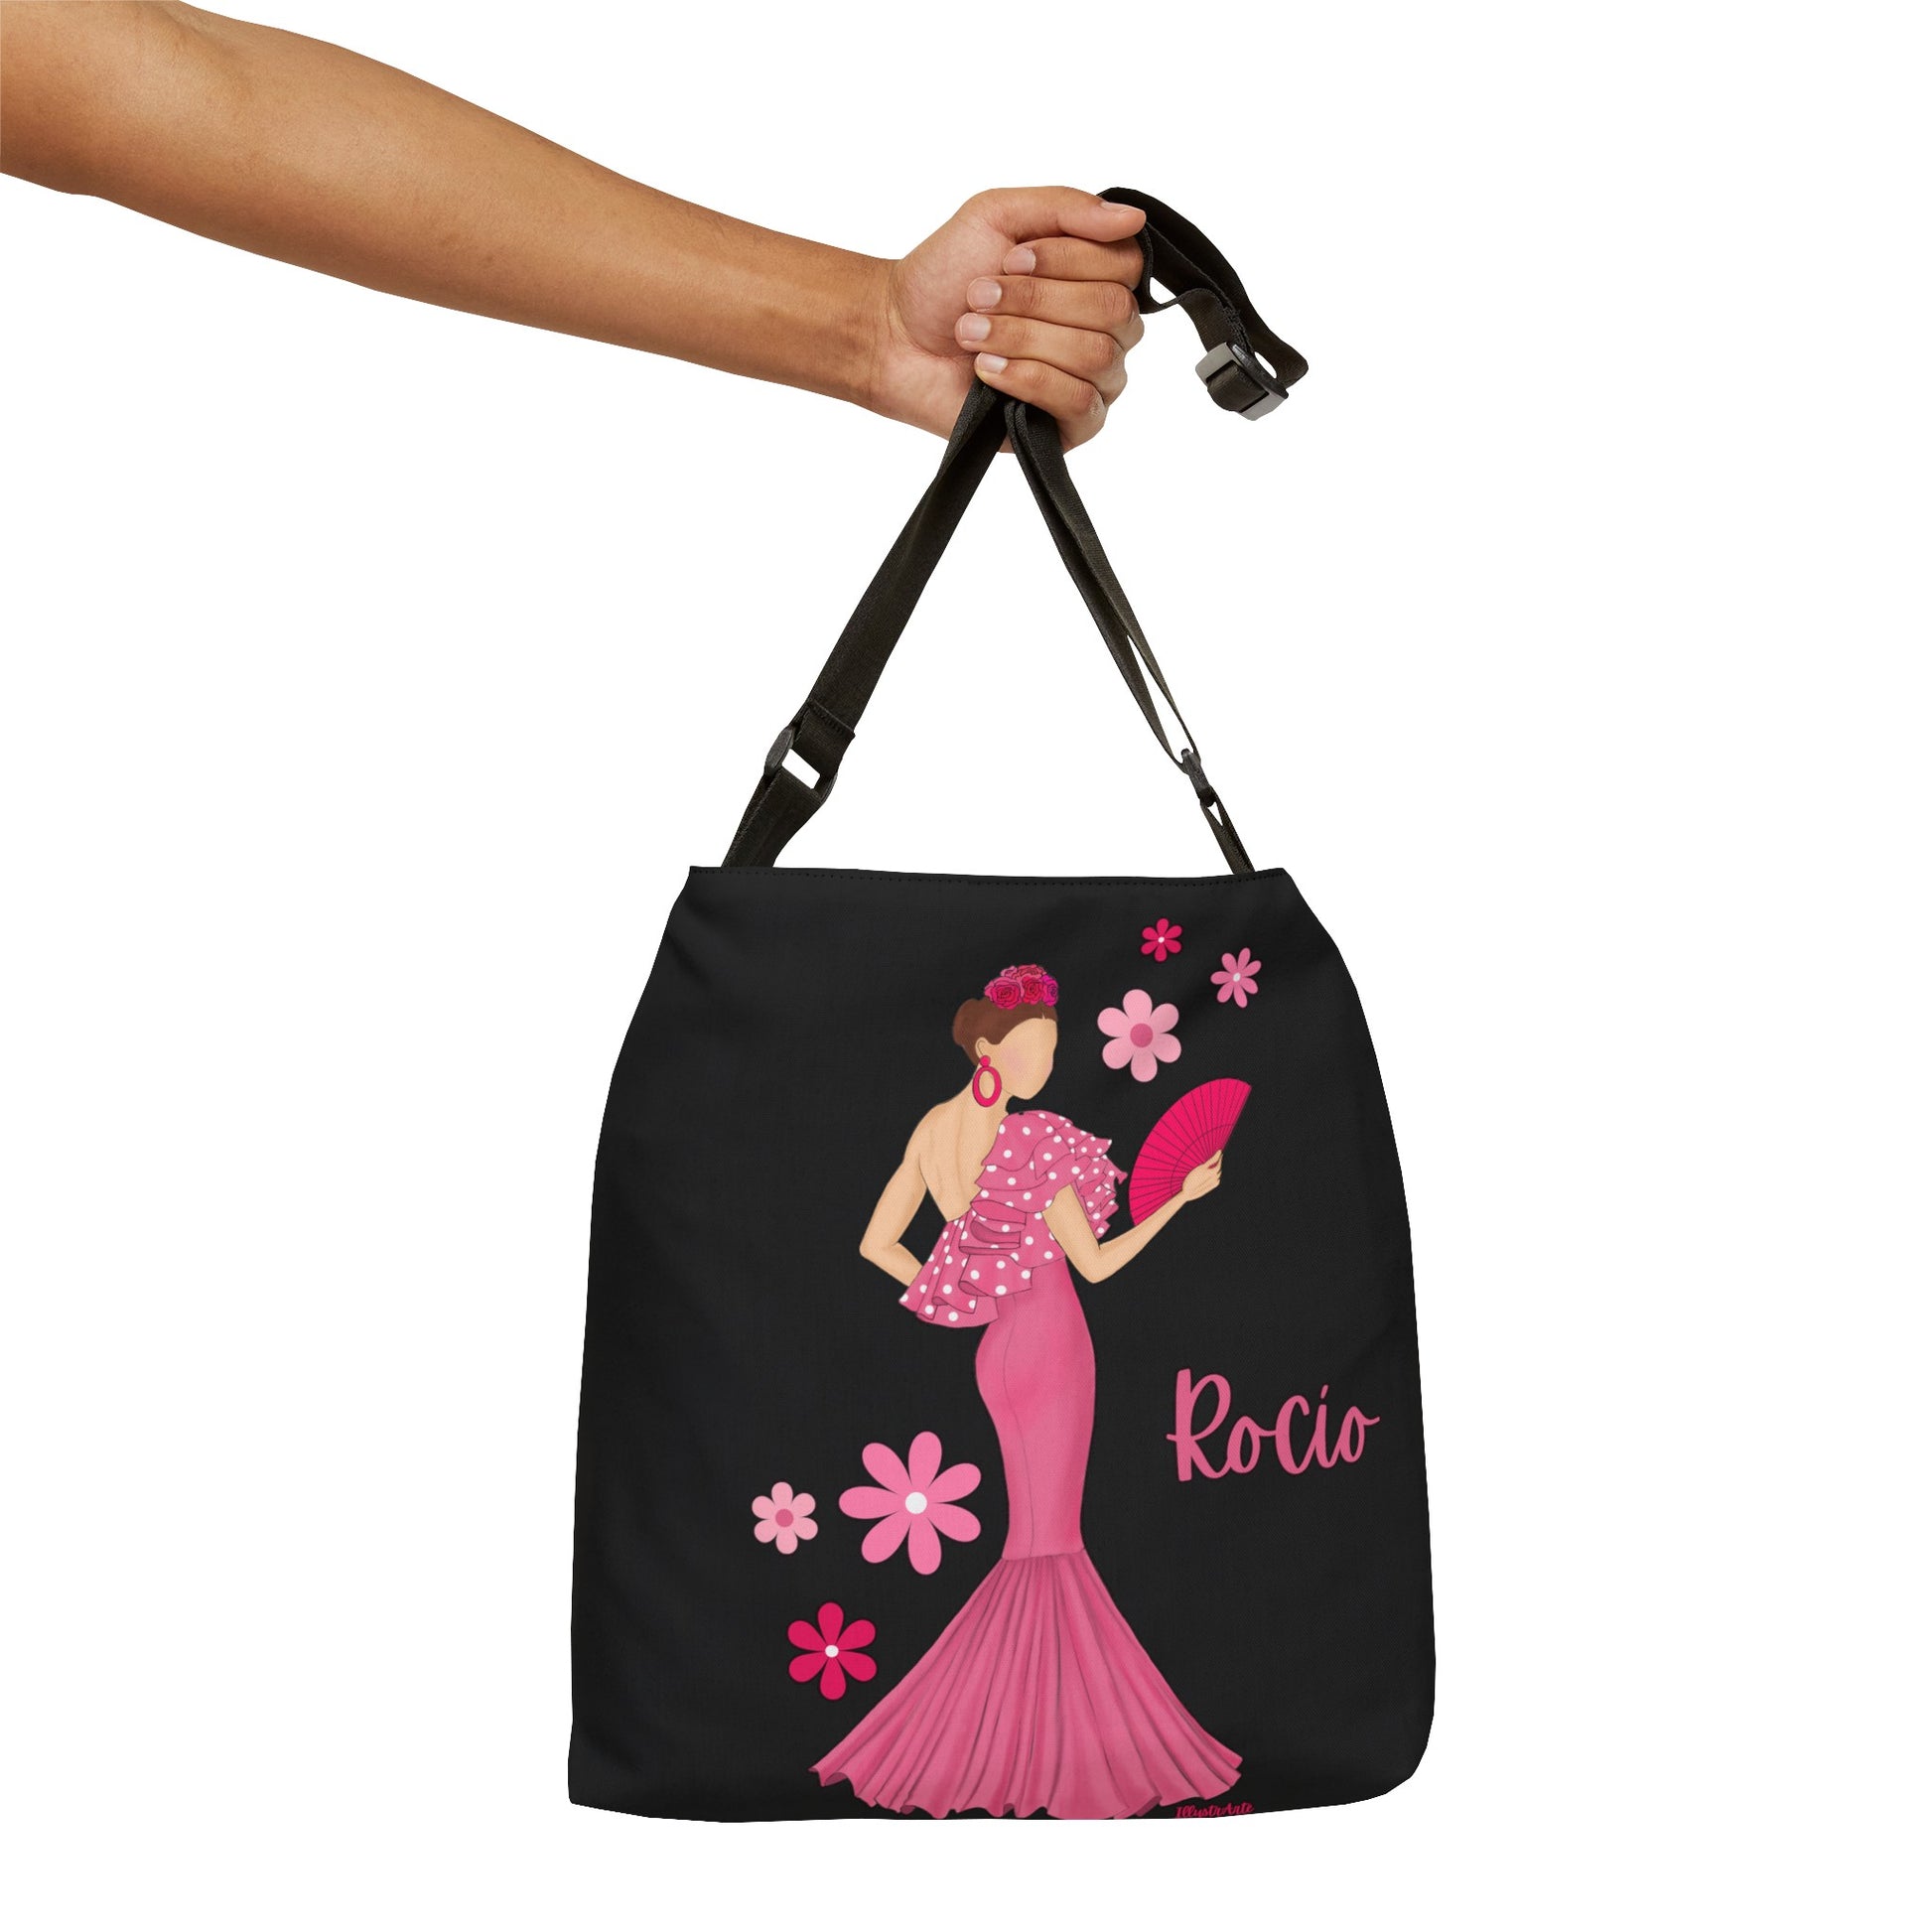 a hand holding a black bag with a woman in a pink dress